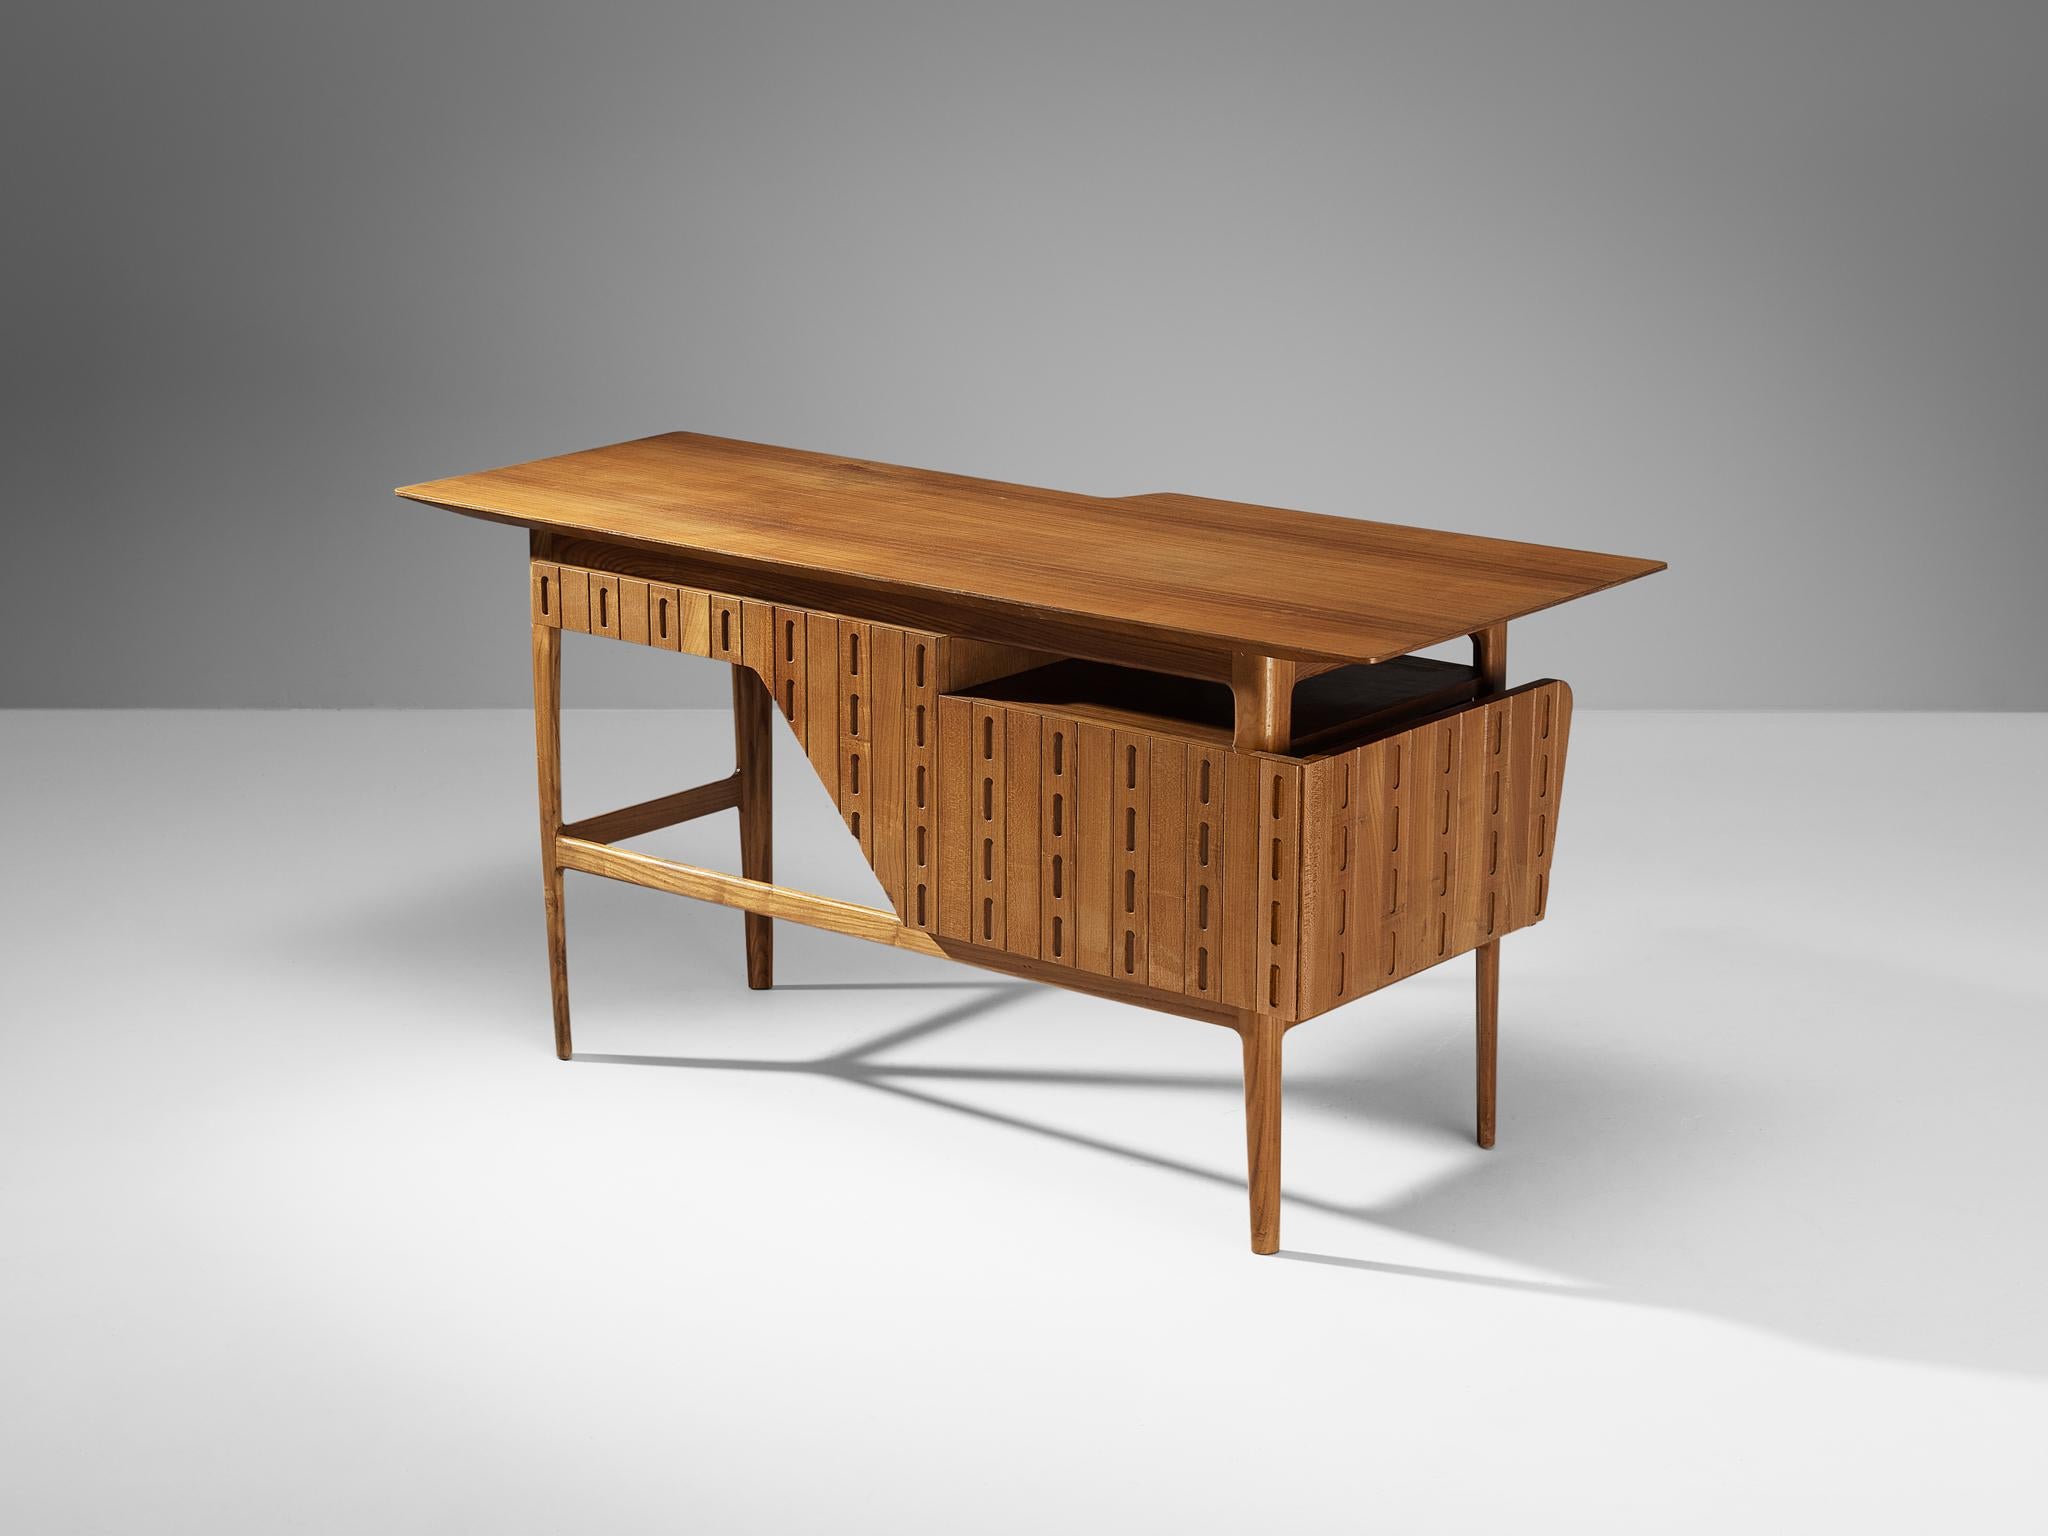 Ico Parisi for Fratelli Rizzi, Intimiano, writing desk, cat. no, '1950.56', chestnut, Italy, 1950

This highly refined writing table is designed by the acknowledged master of Italian mid-century design Ico Parisi (1916-1996). His design language is